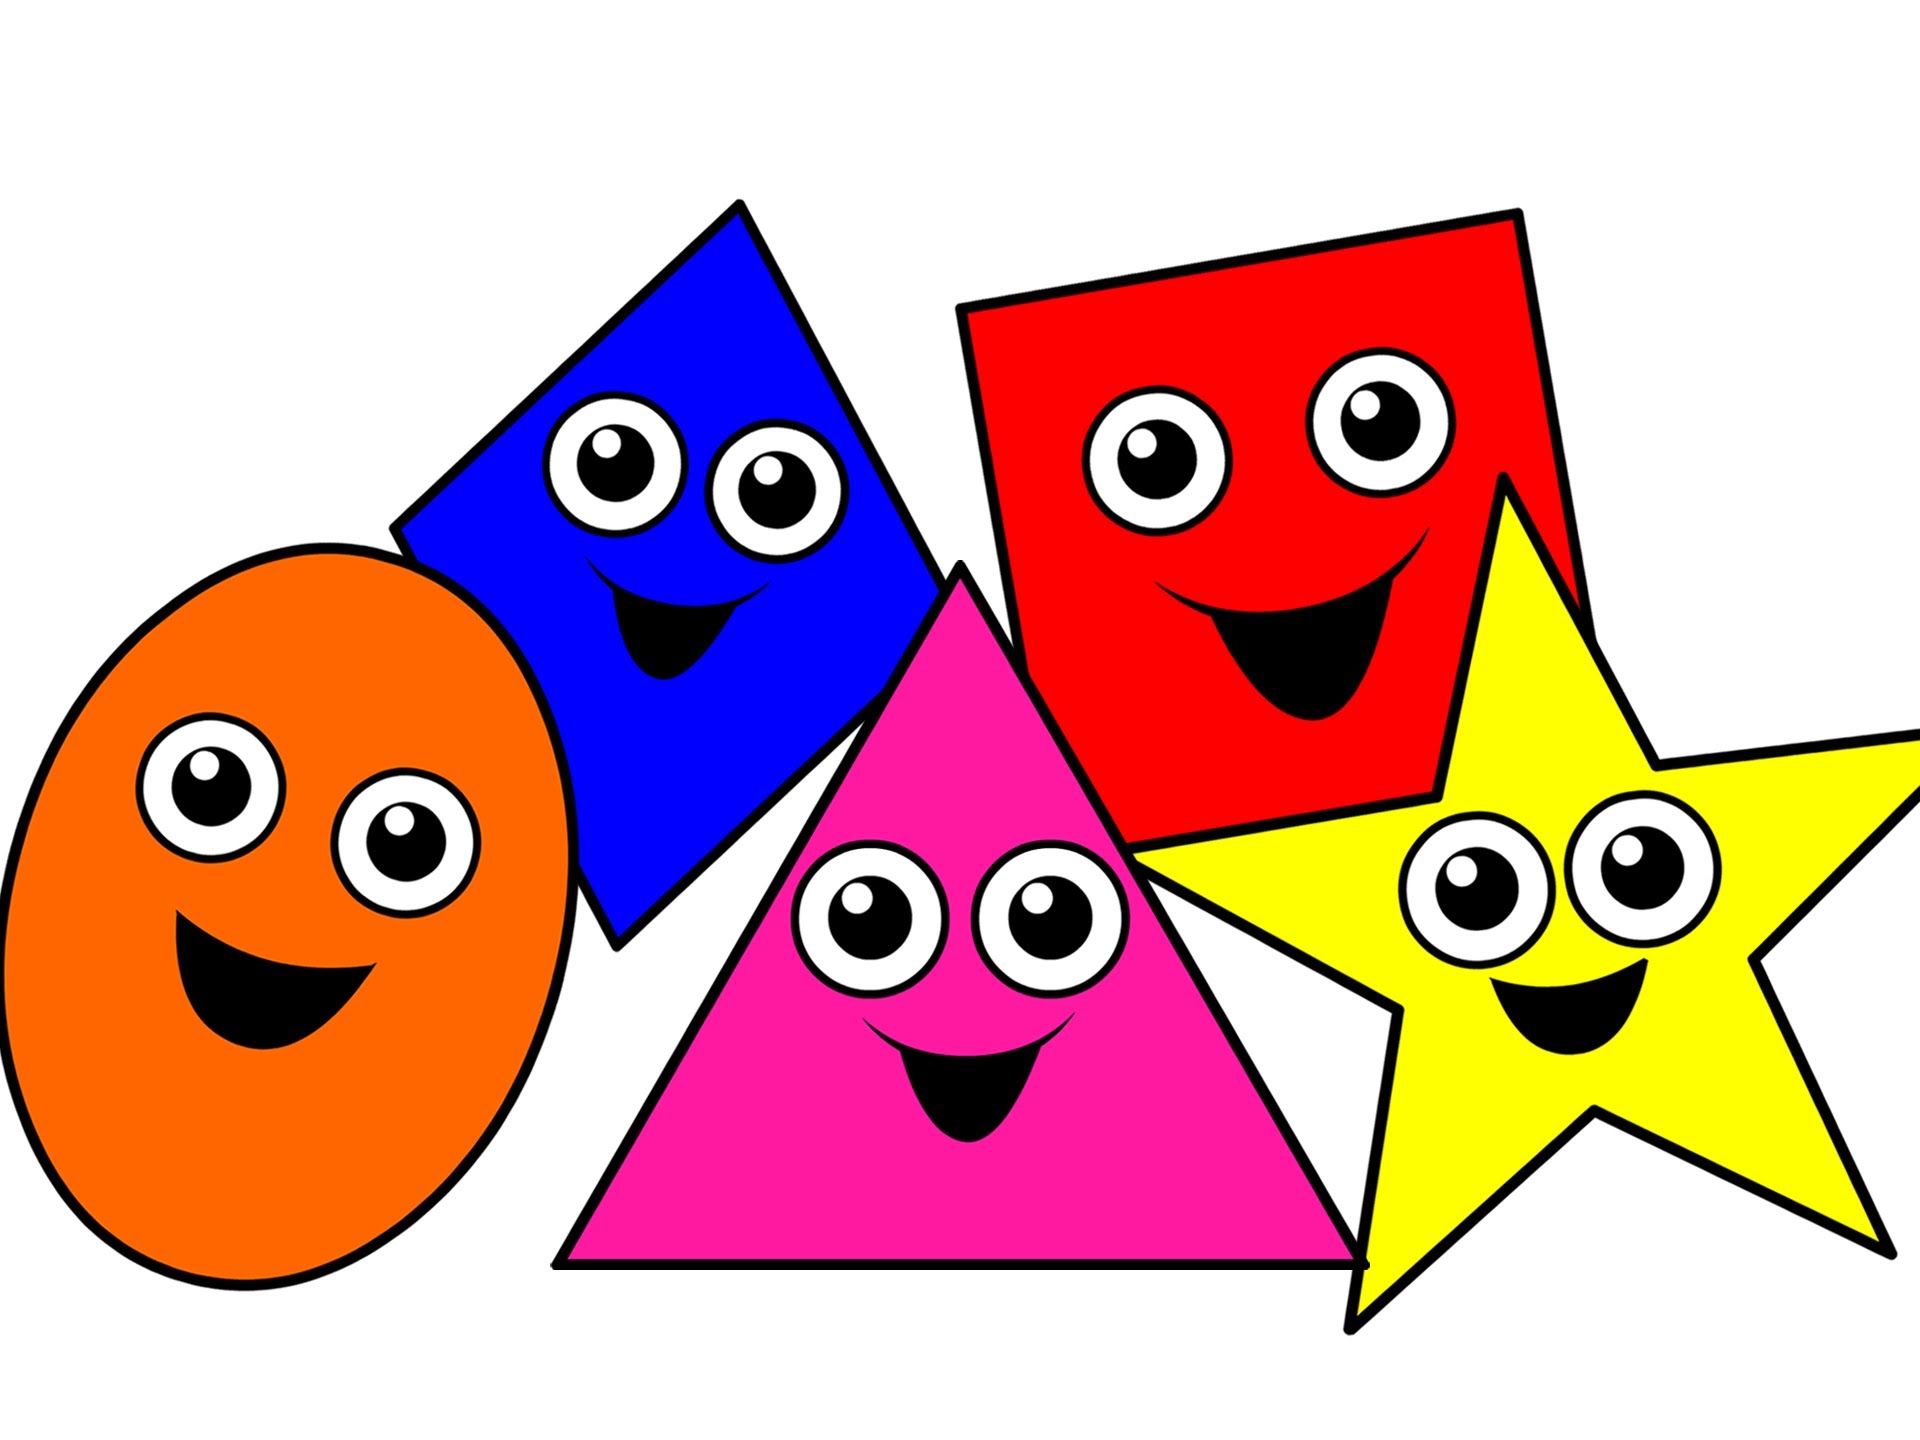 Shapes clipart